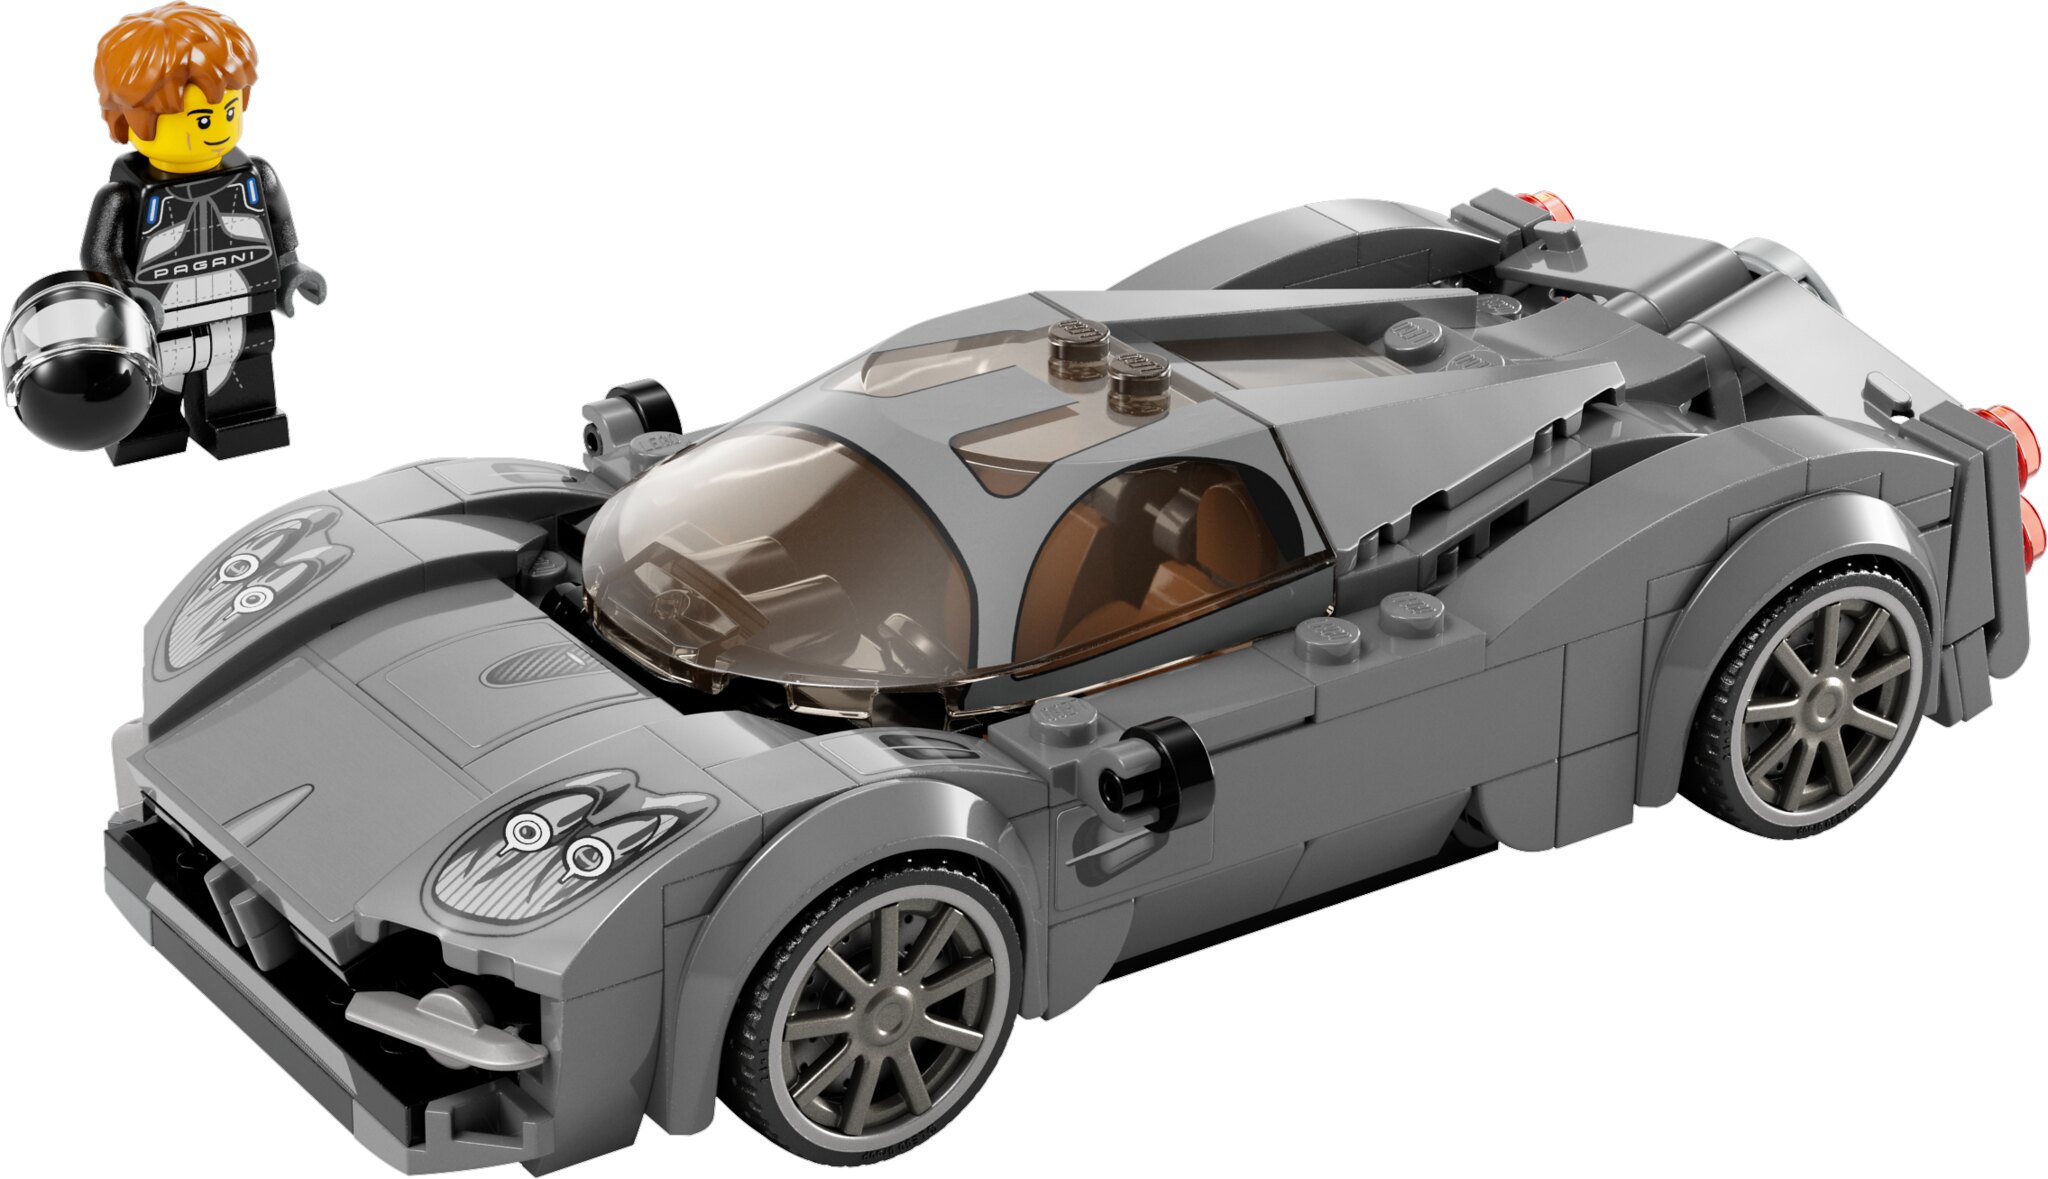 LEGO(R)Speed Champions New Sets Revealed